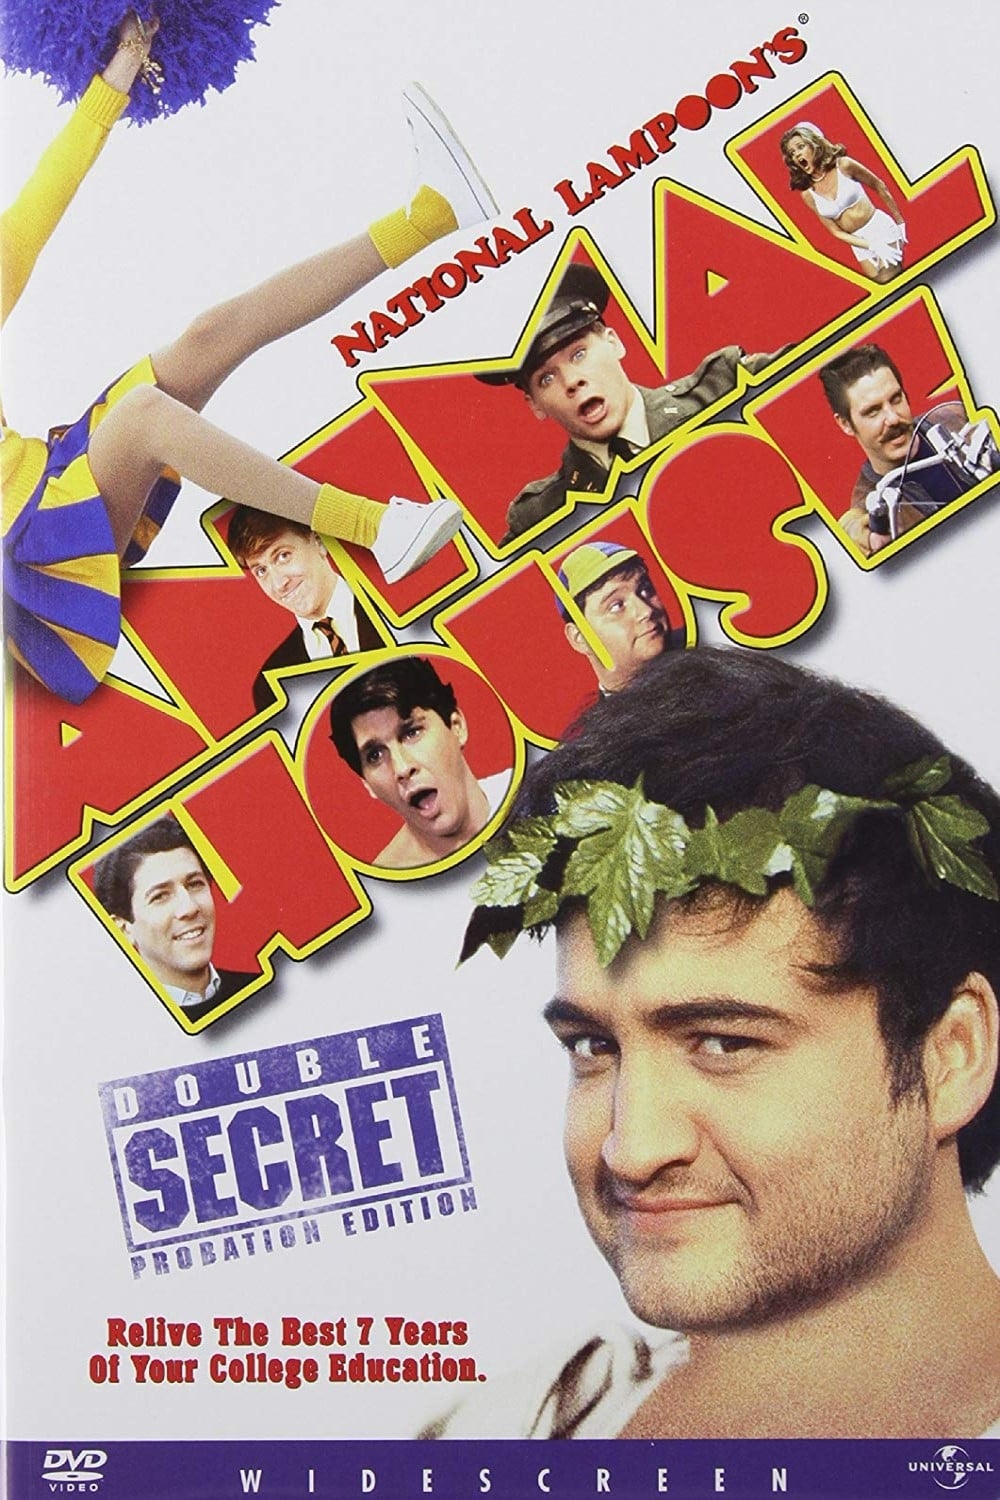 The Yearbook: An 'Animal House' Reunion (1998)